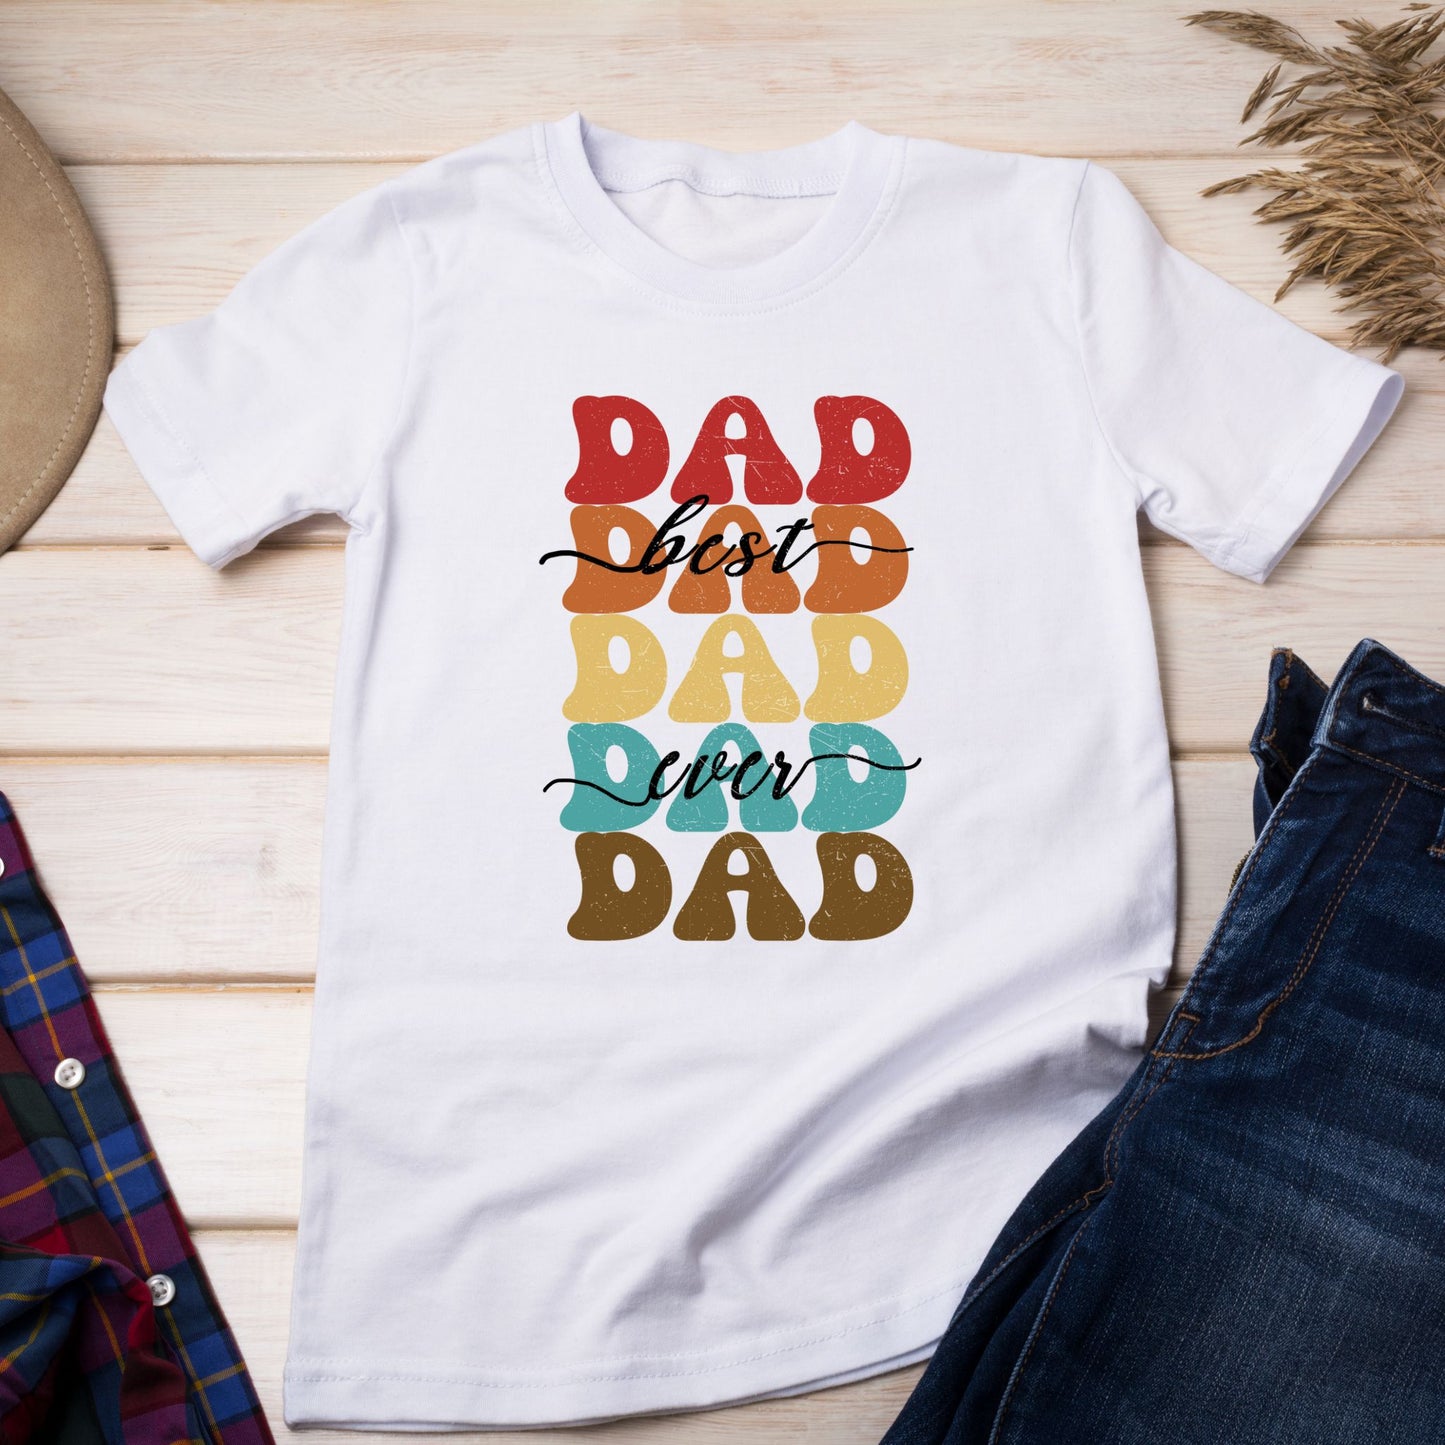 The "Best Dad Ever" Dad T-Shirt